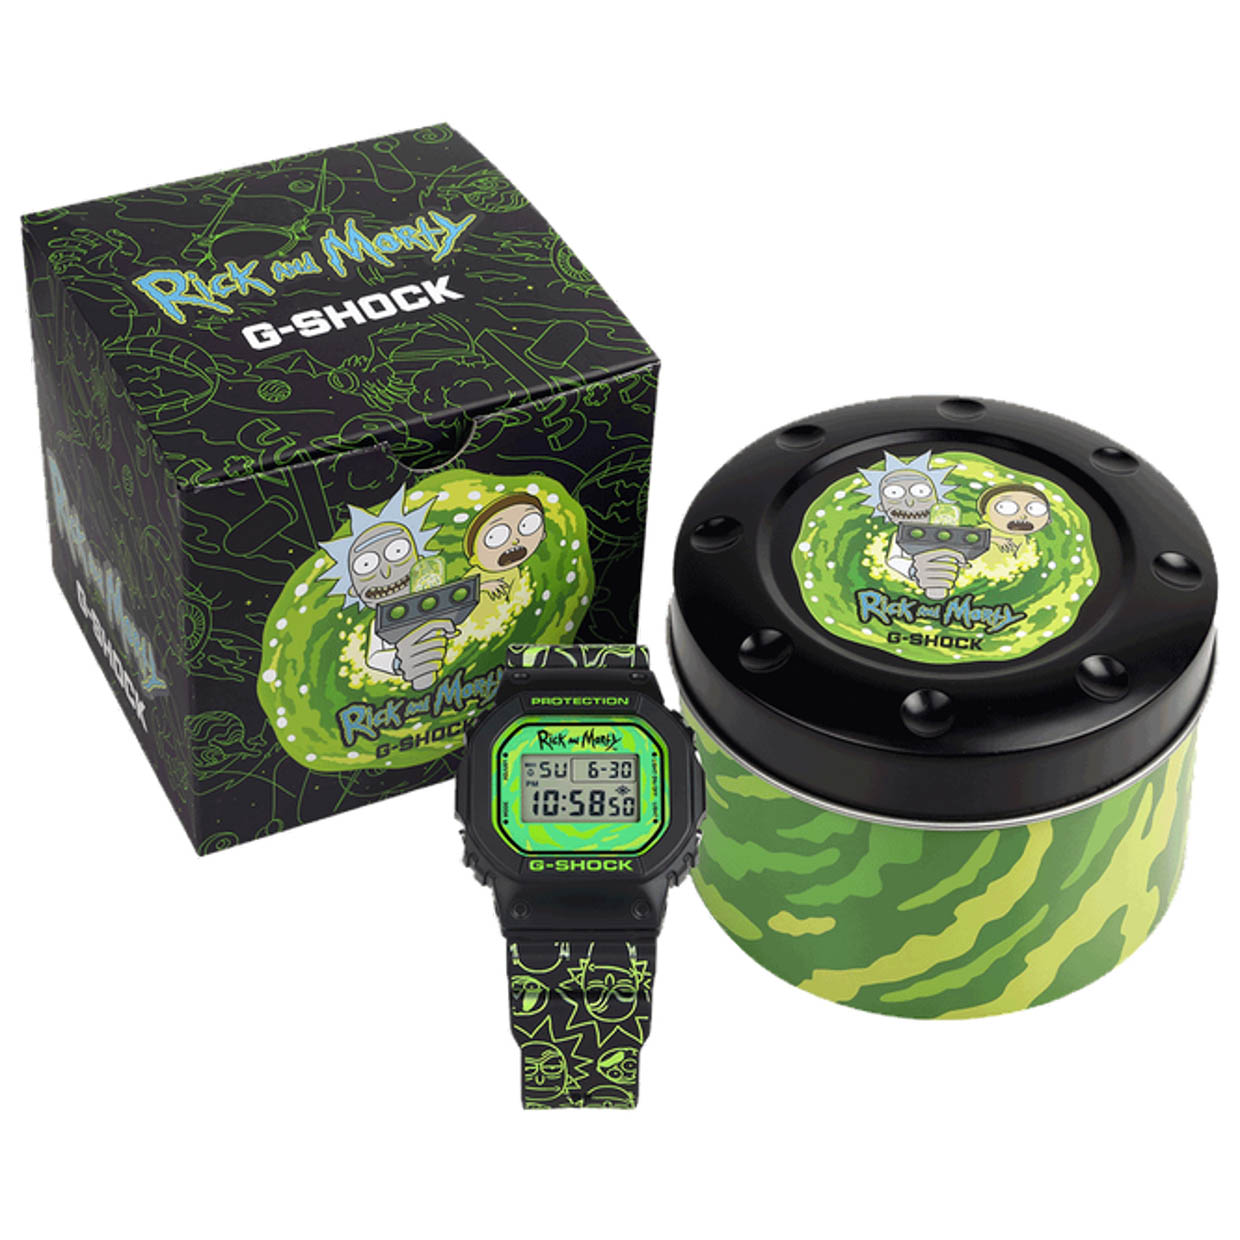 G-SHOCK x Rick and Morty Watch